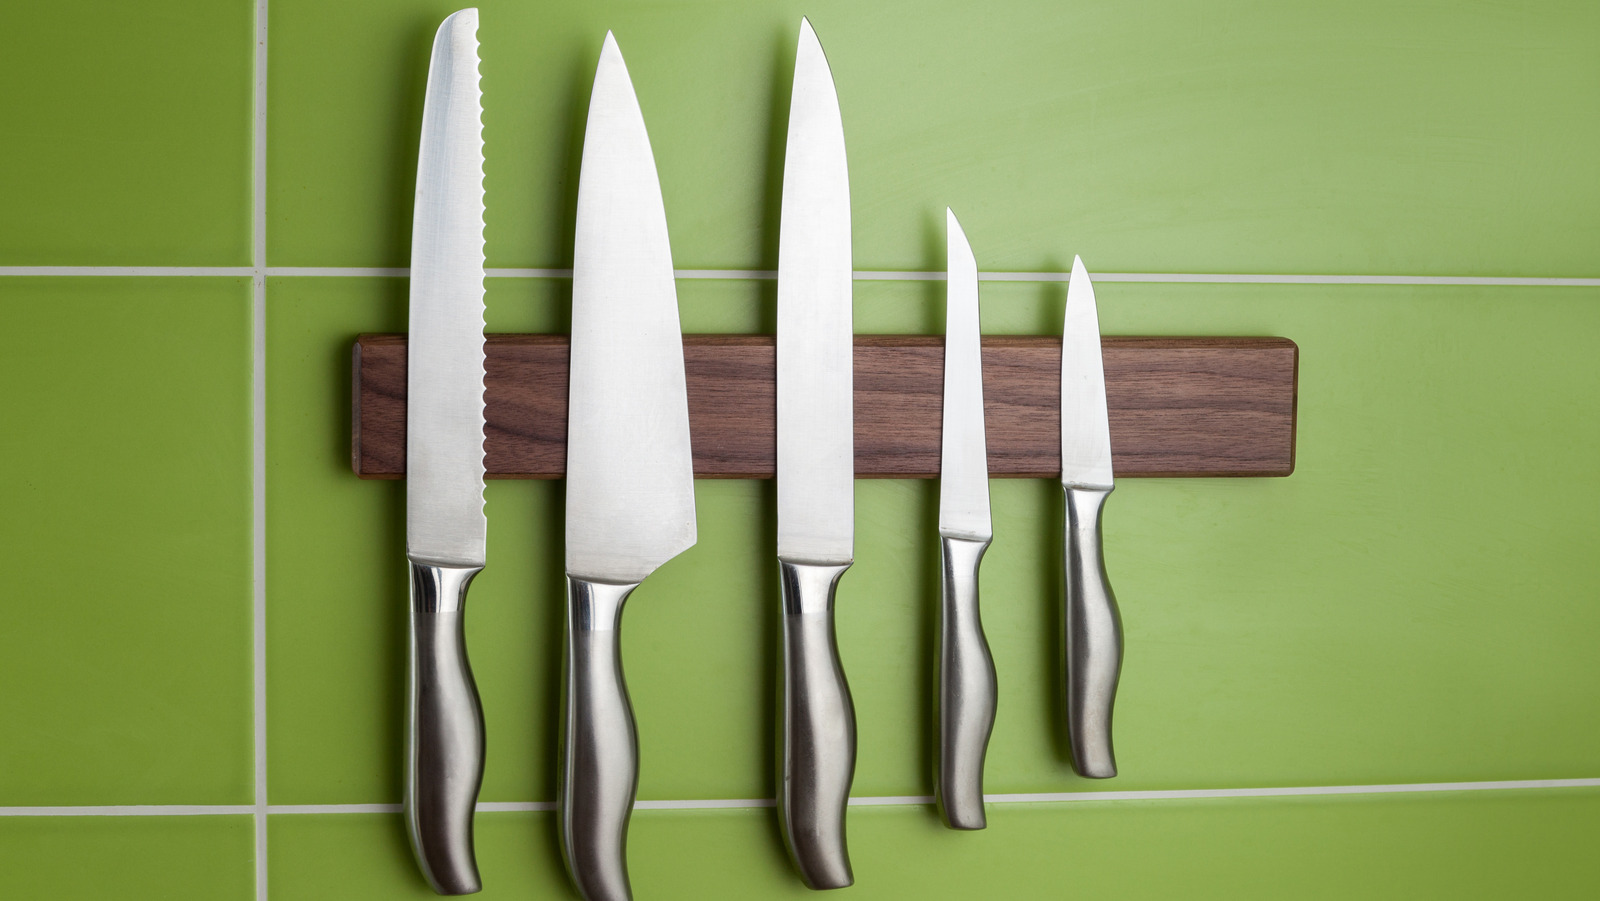 https://www.housedigest.com/img/gallery/12-unexpected-ways-to-use-your-magnetic-knife-rack/l-intro-1671013077.jpg